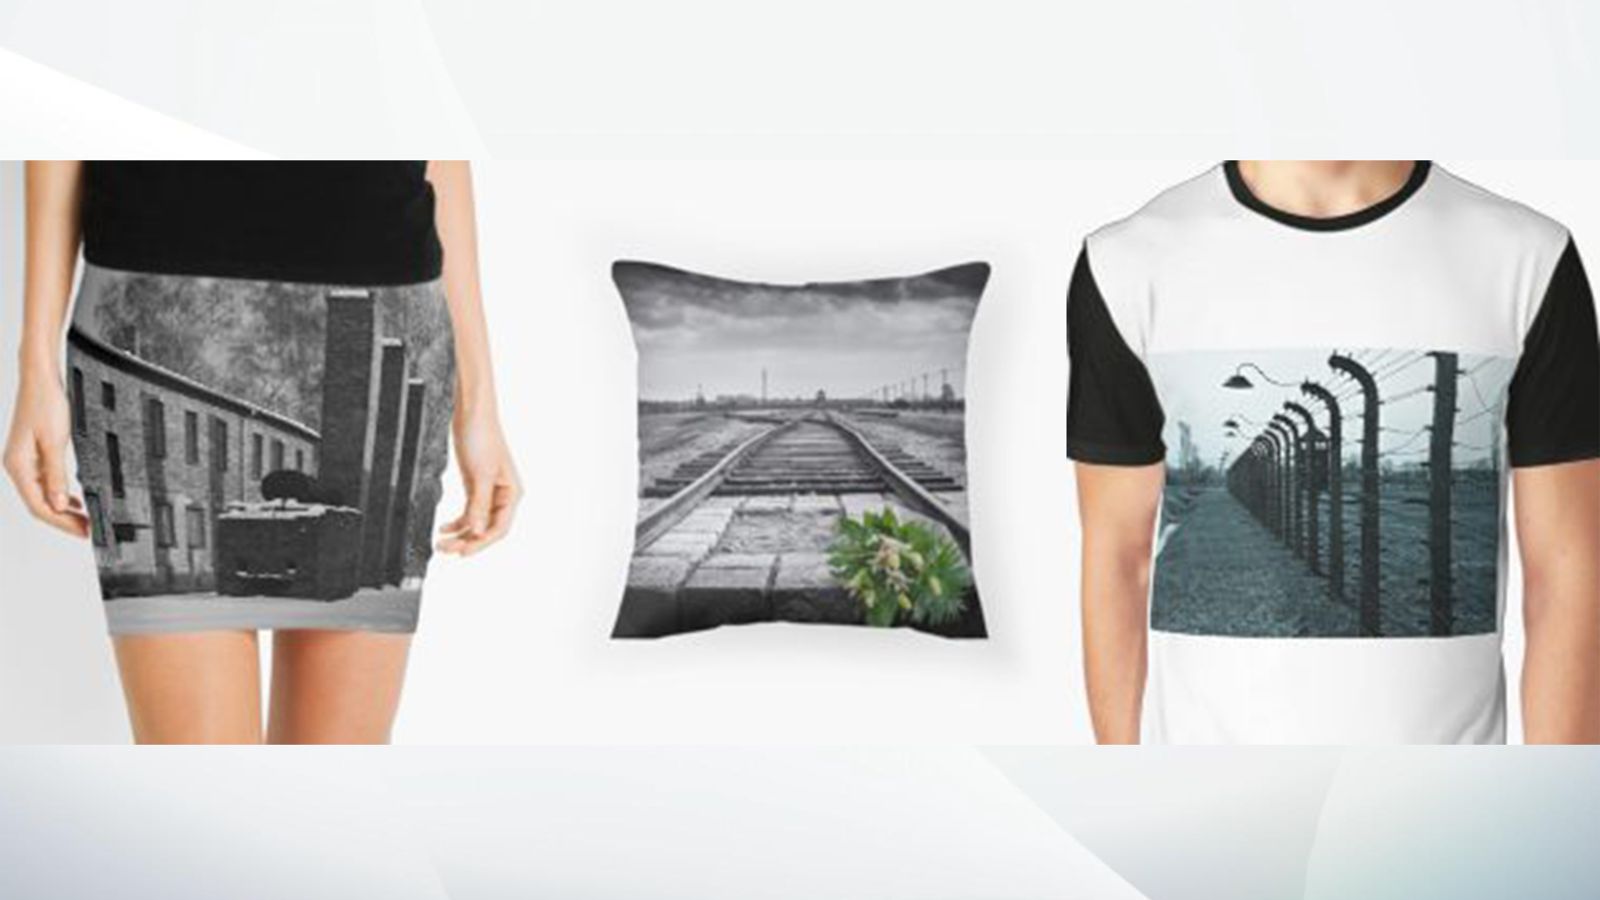 Online Retailer Redbubble Criticised Over Auschwitz Themed Pillows